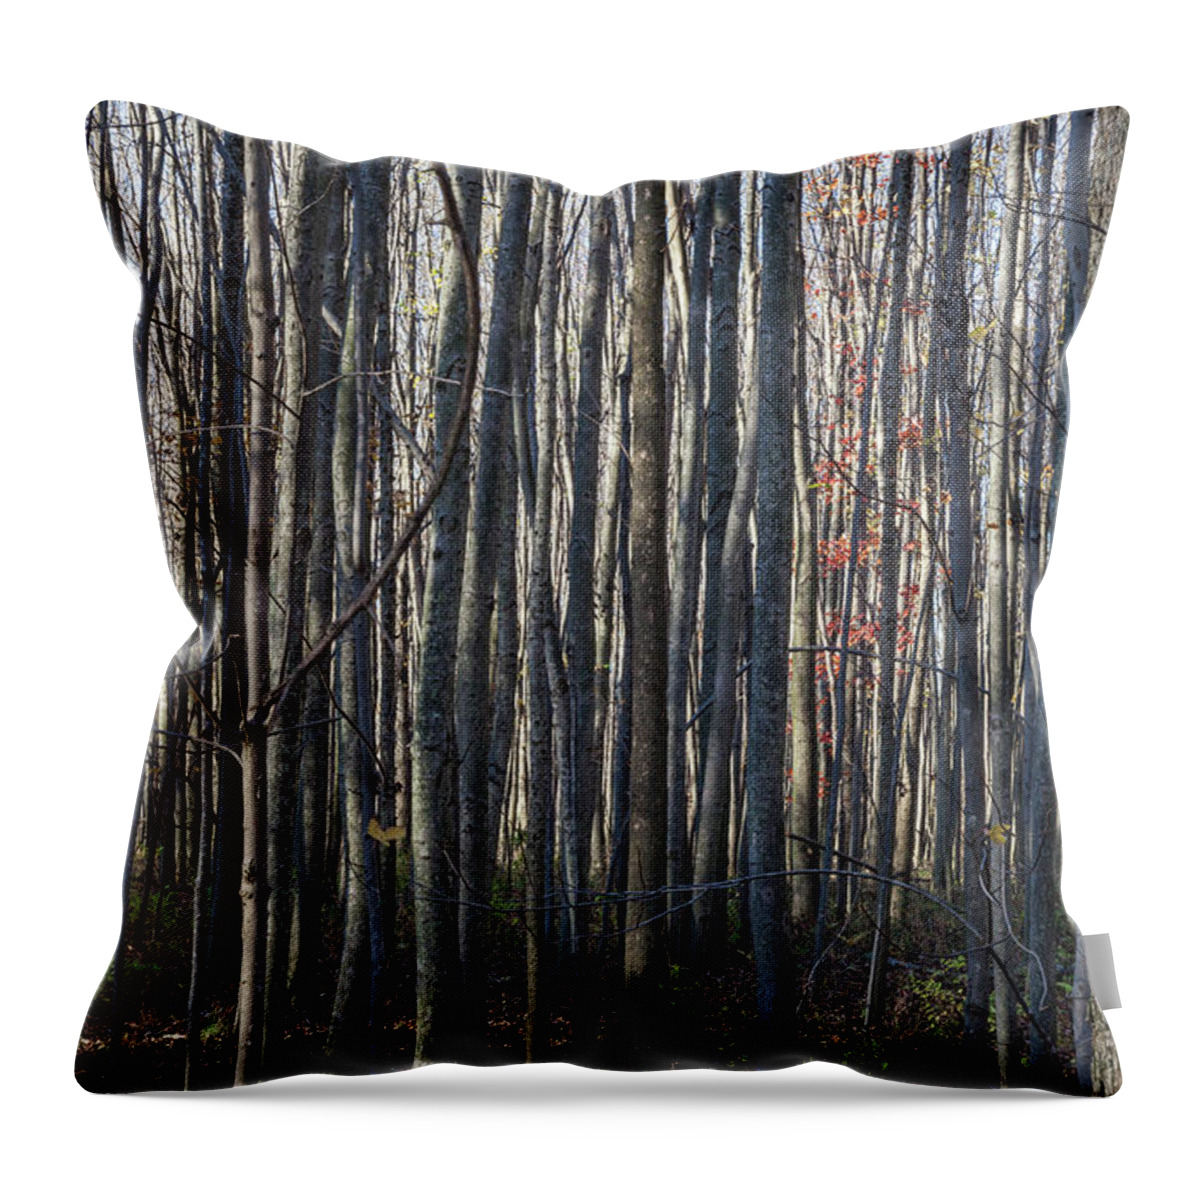 Treez Throw Pillow featuring the photograph Treez by Lon Dittrick